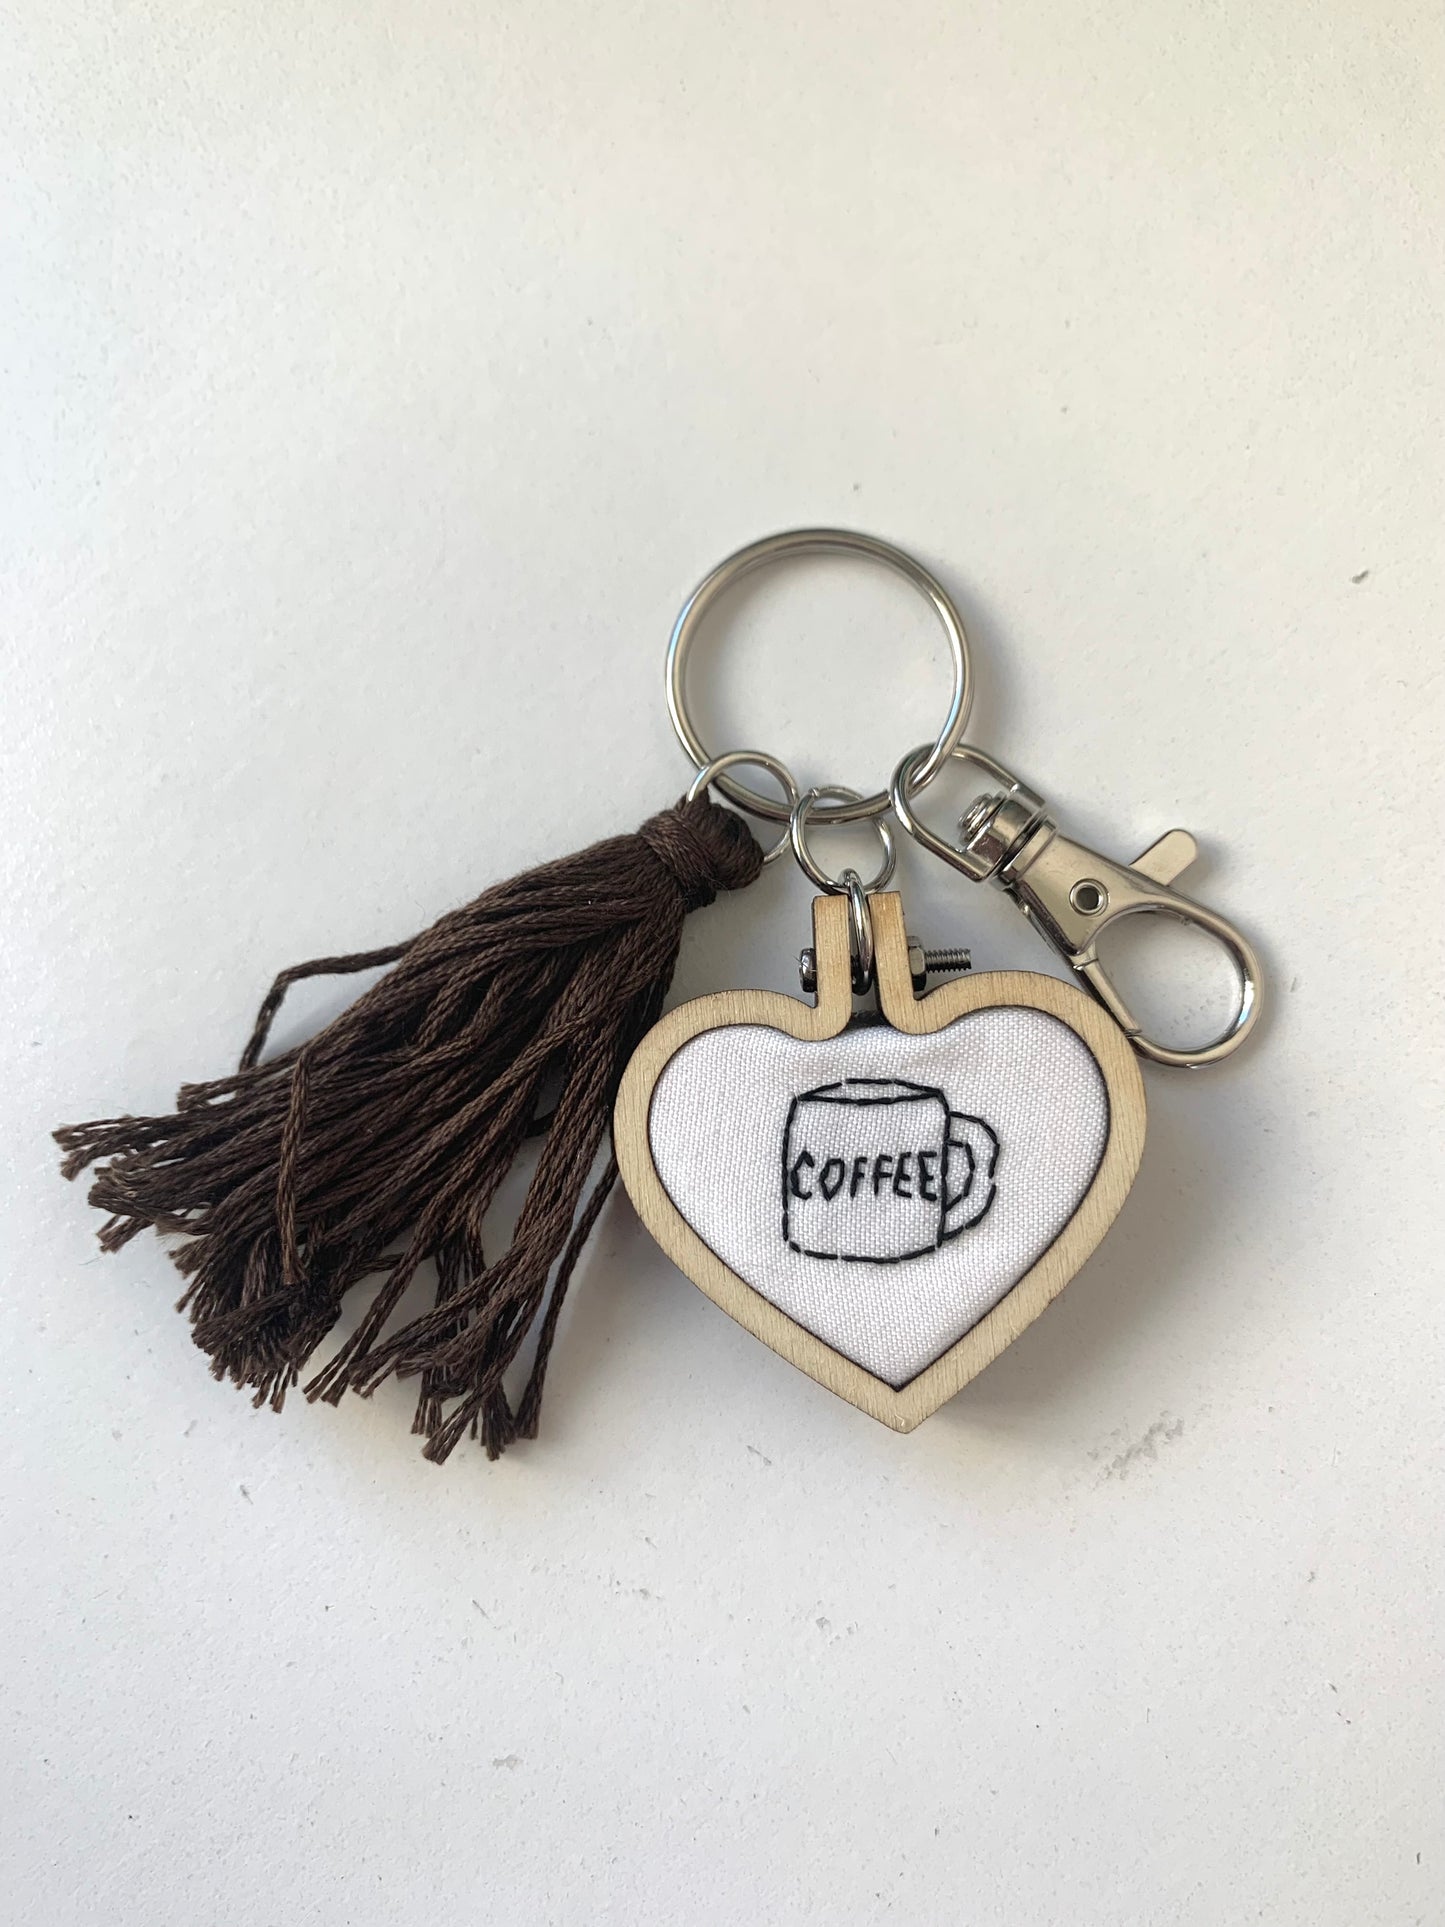 Heart Hand Embroidered Keychain with Tassel